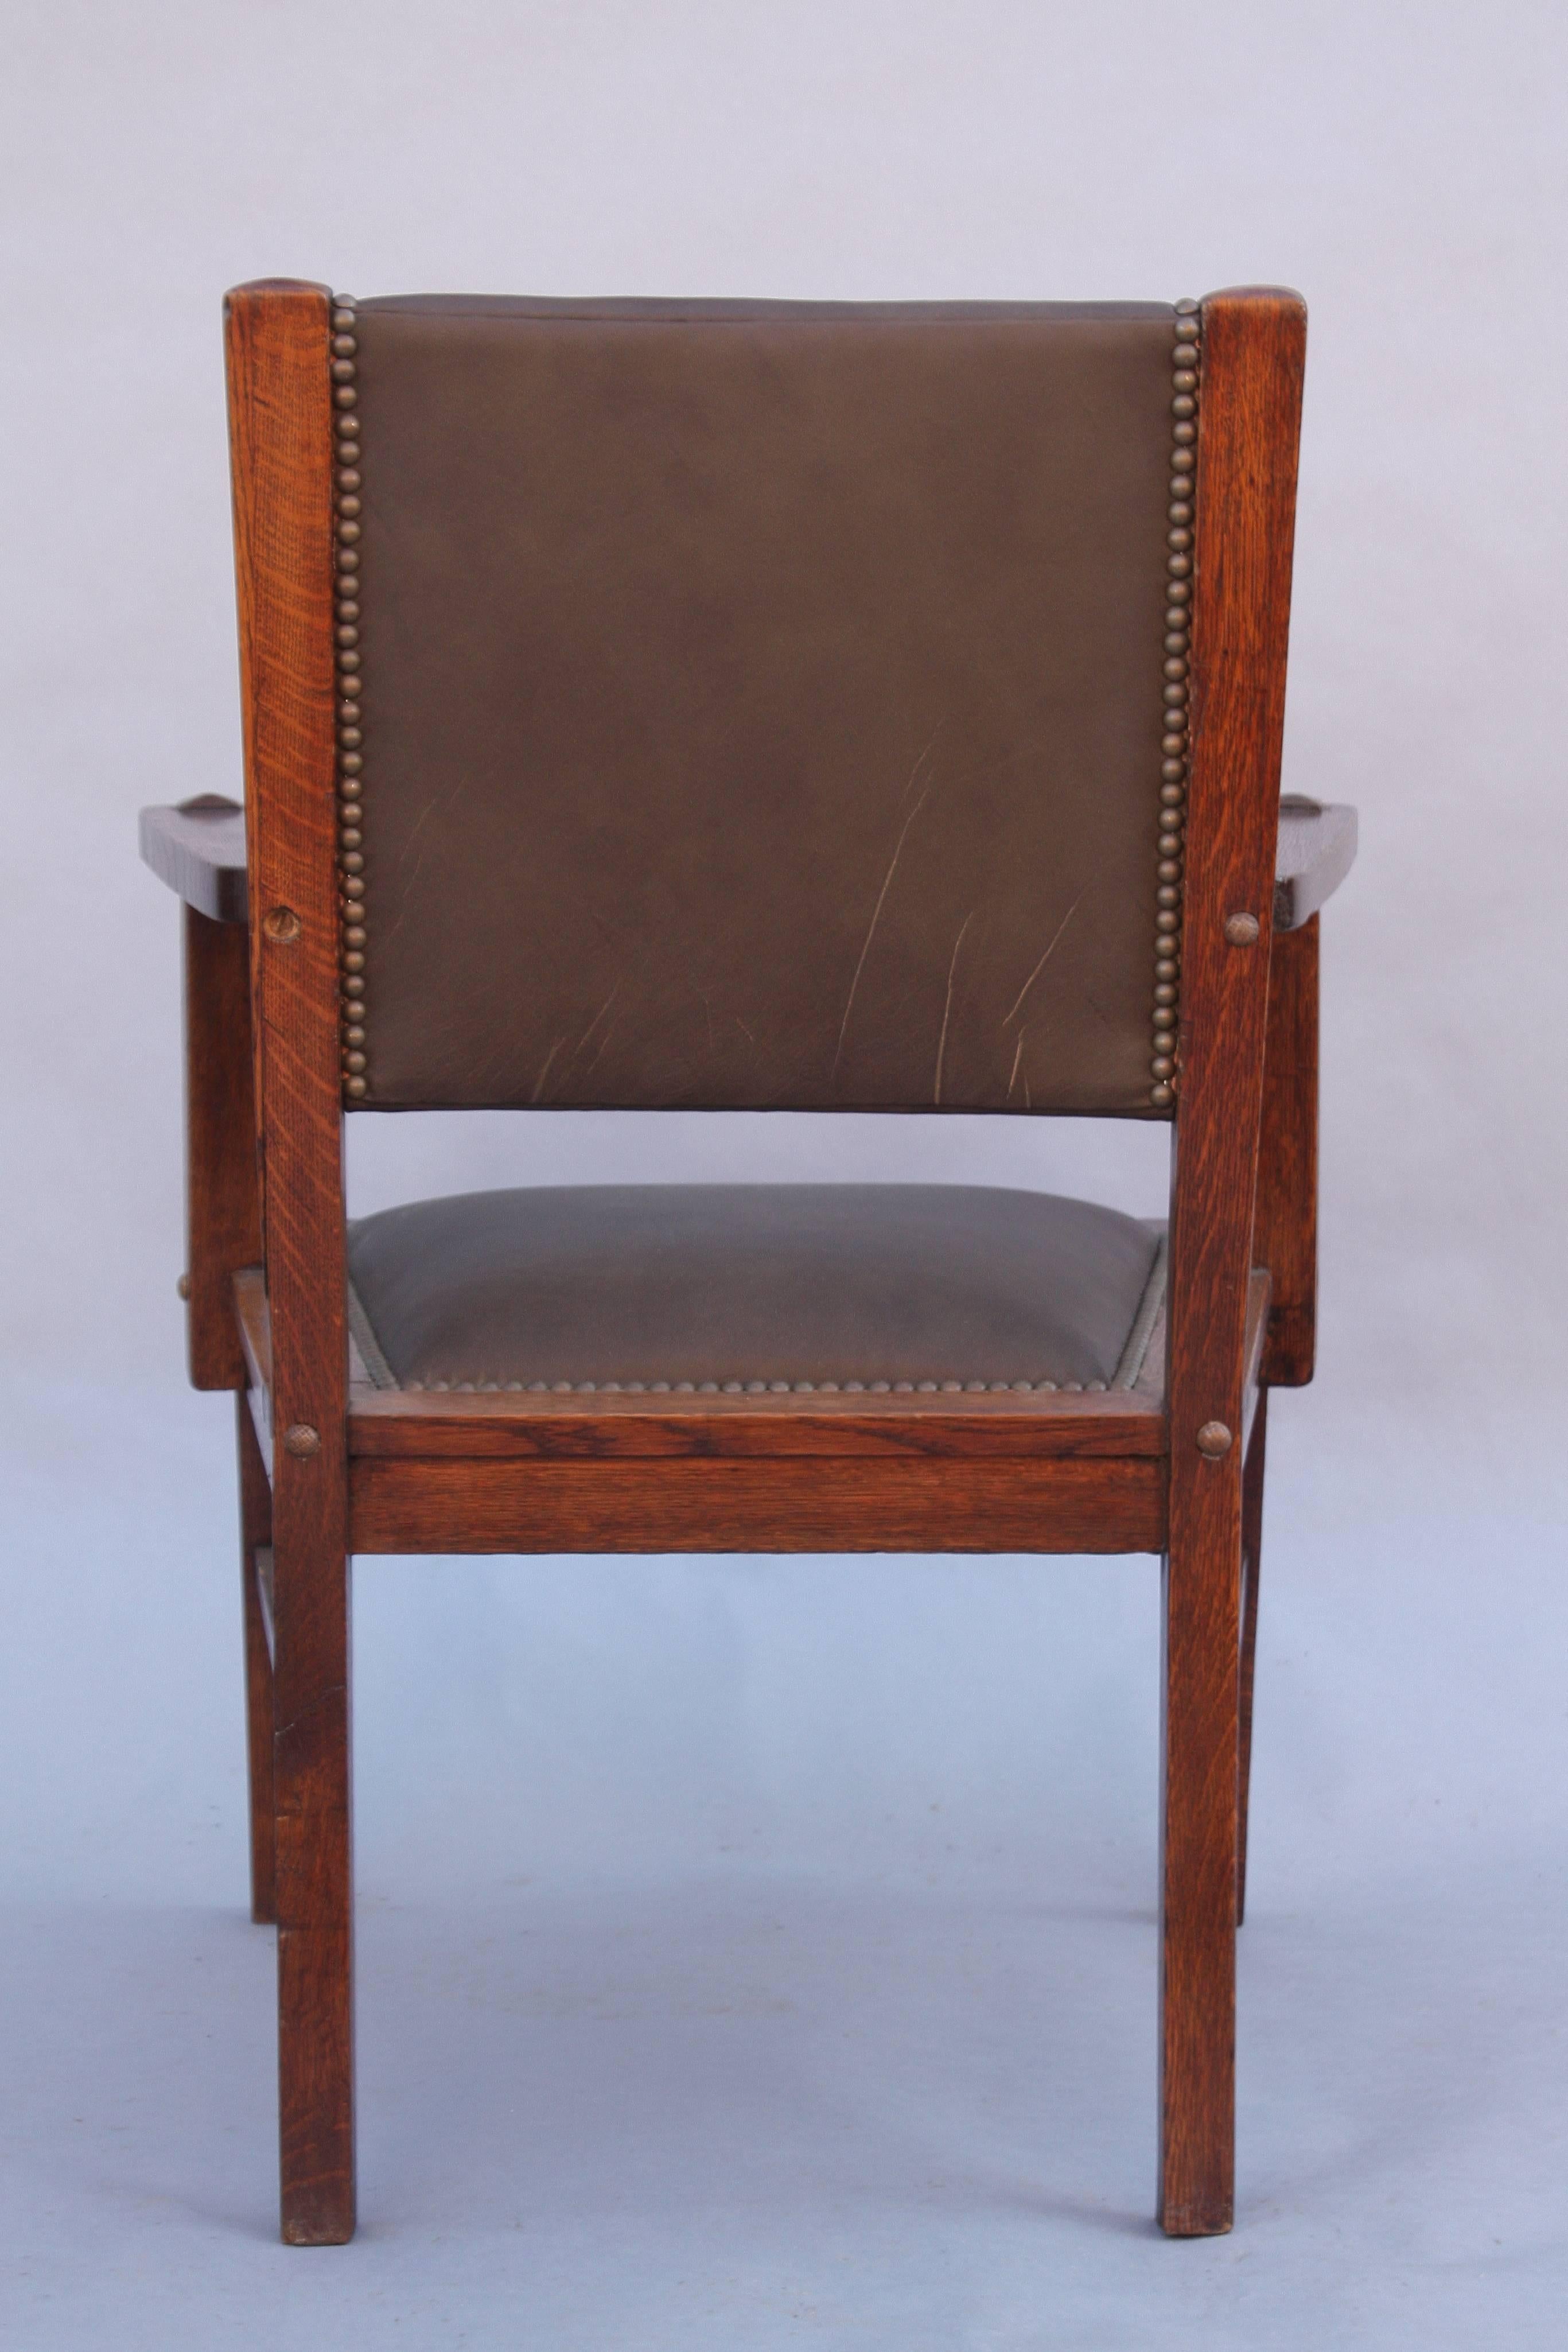 Oak craftsman era chair with new riveted leather upholstery, circa 1910. 35